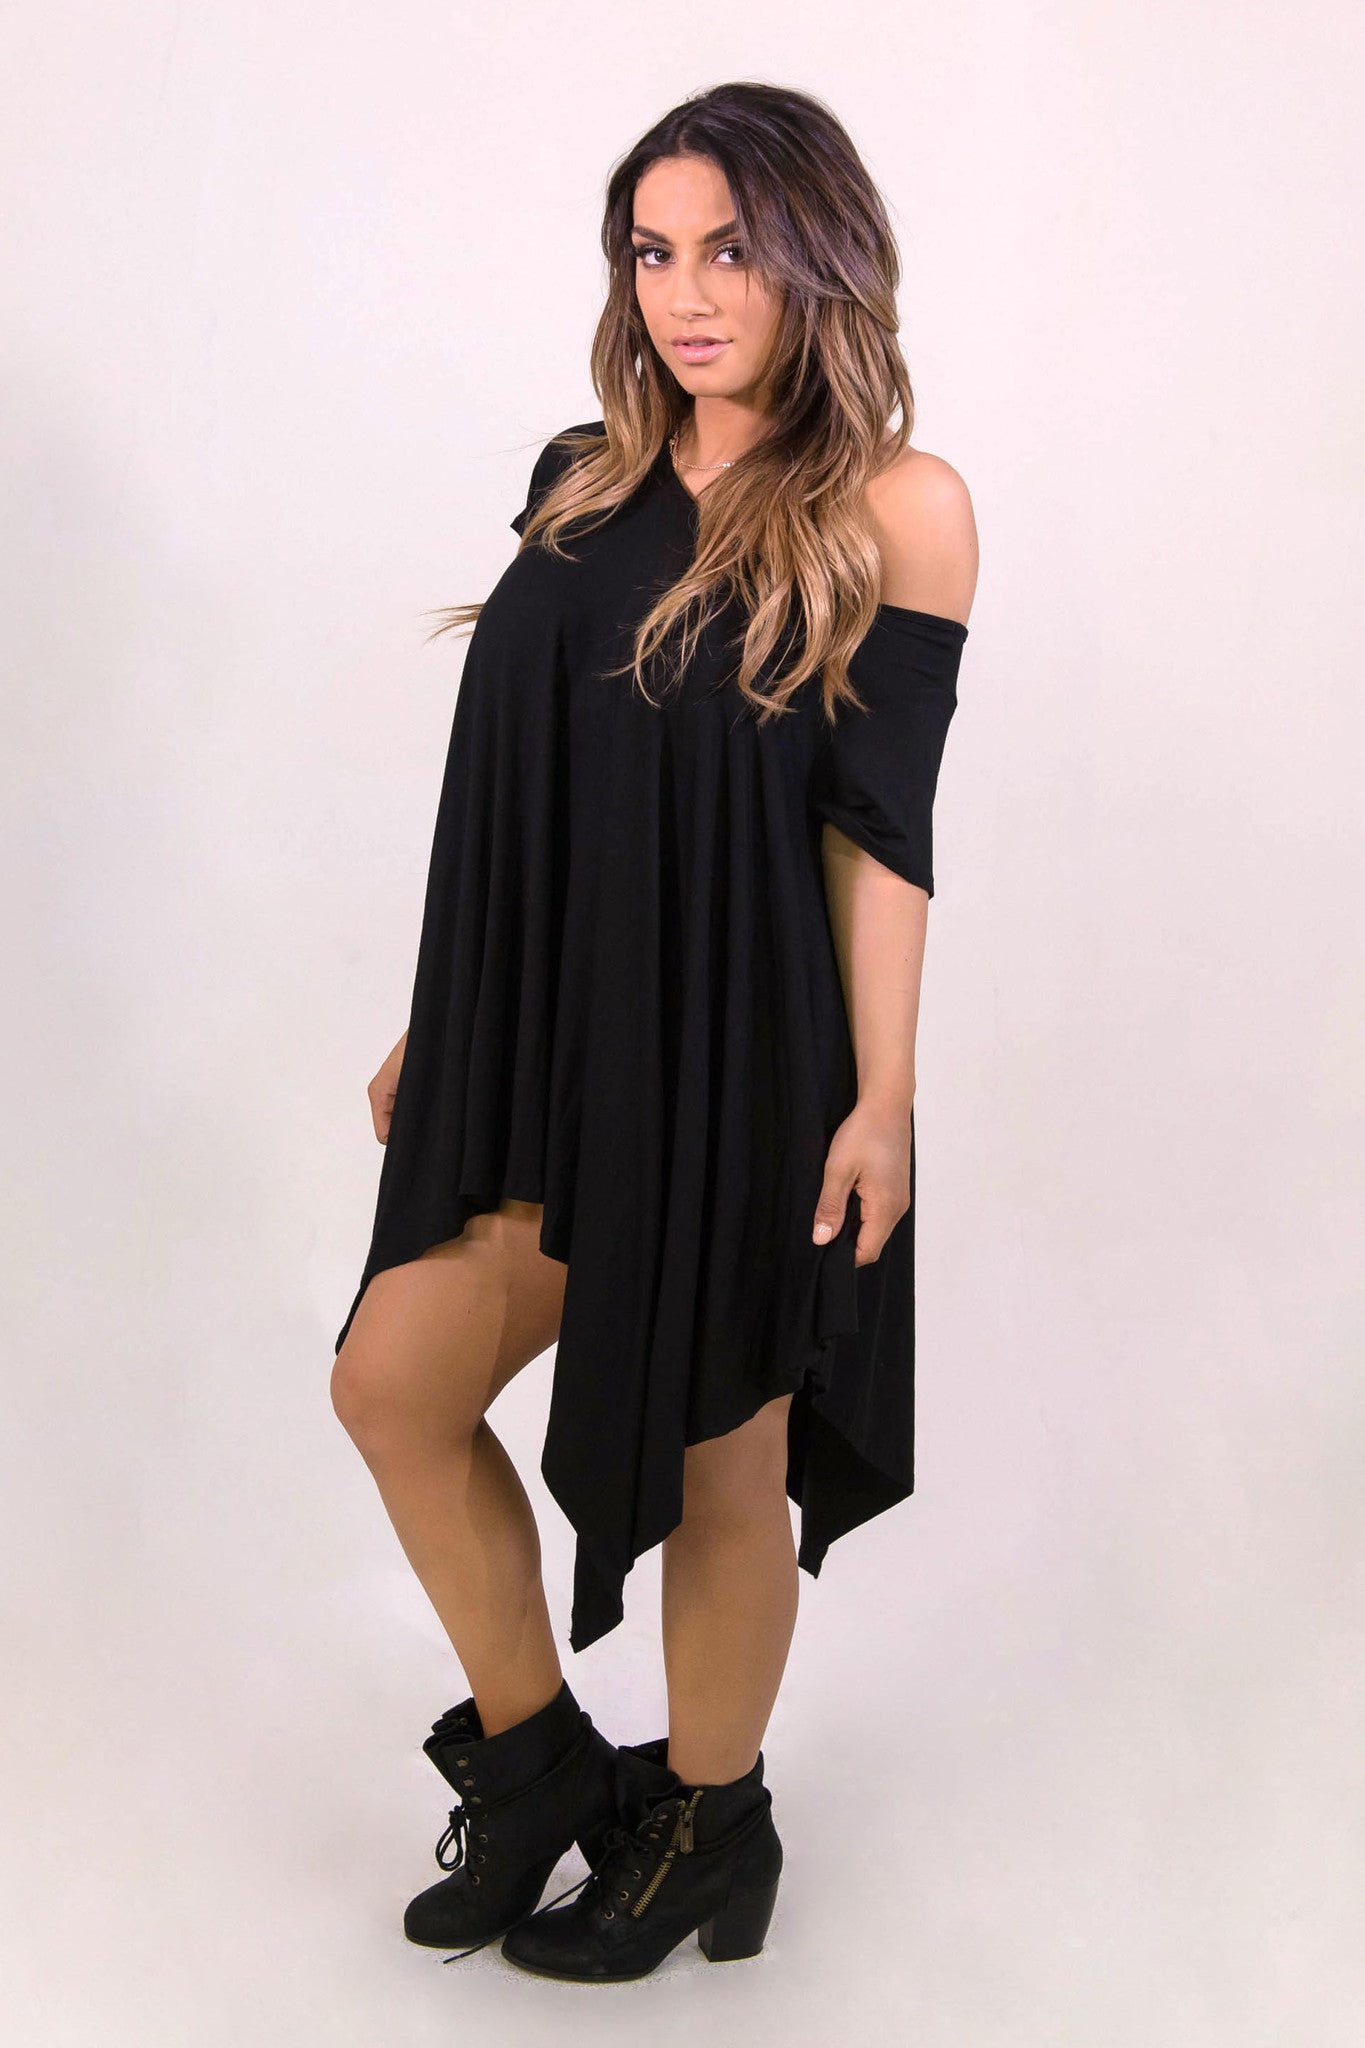 Up and Down Dress - DRESSES - FAITH APPAREL - Free Vibrationz - 2